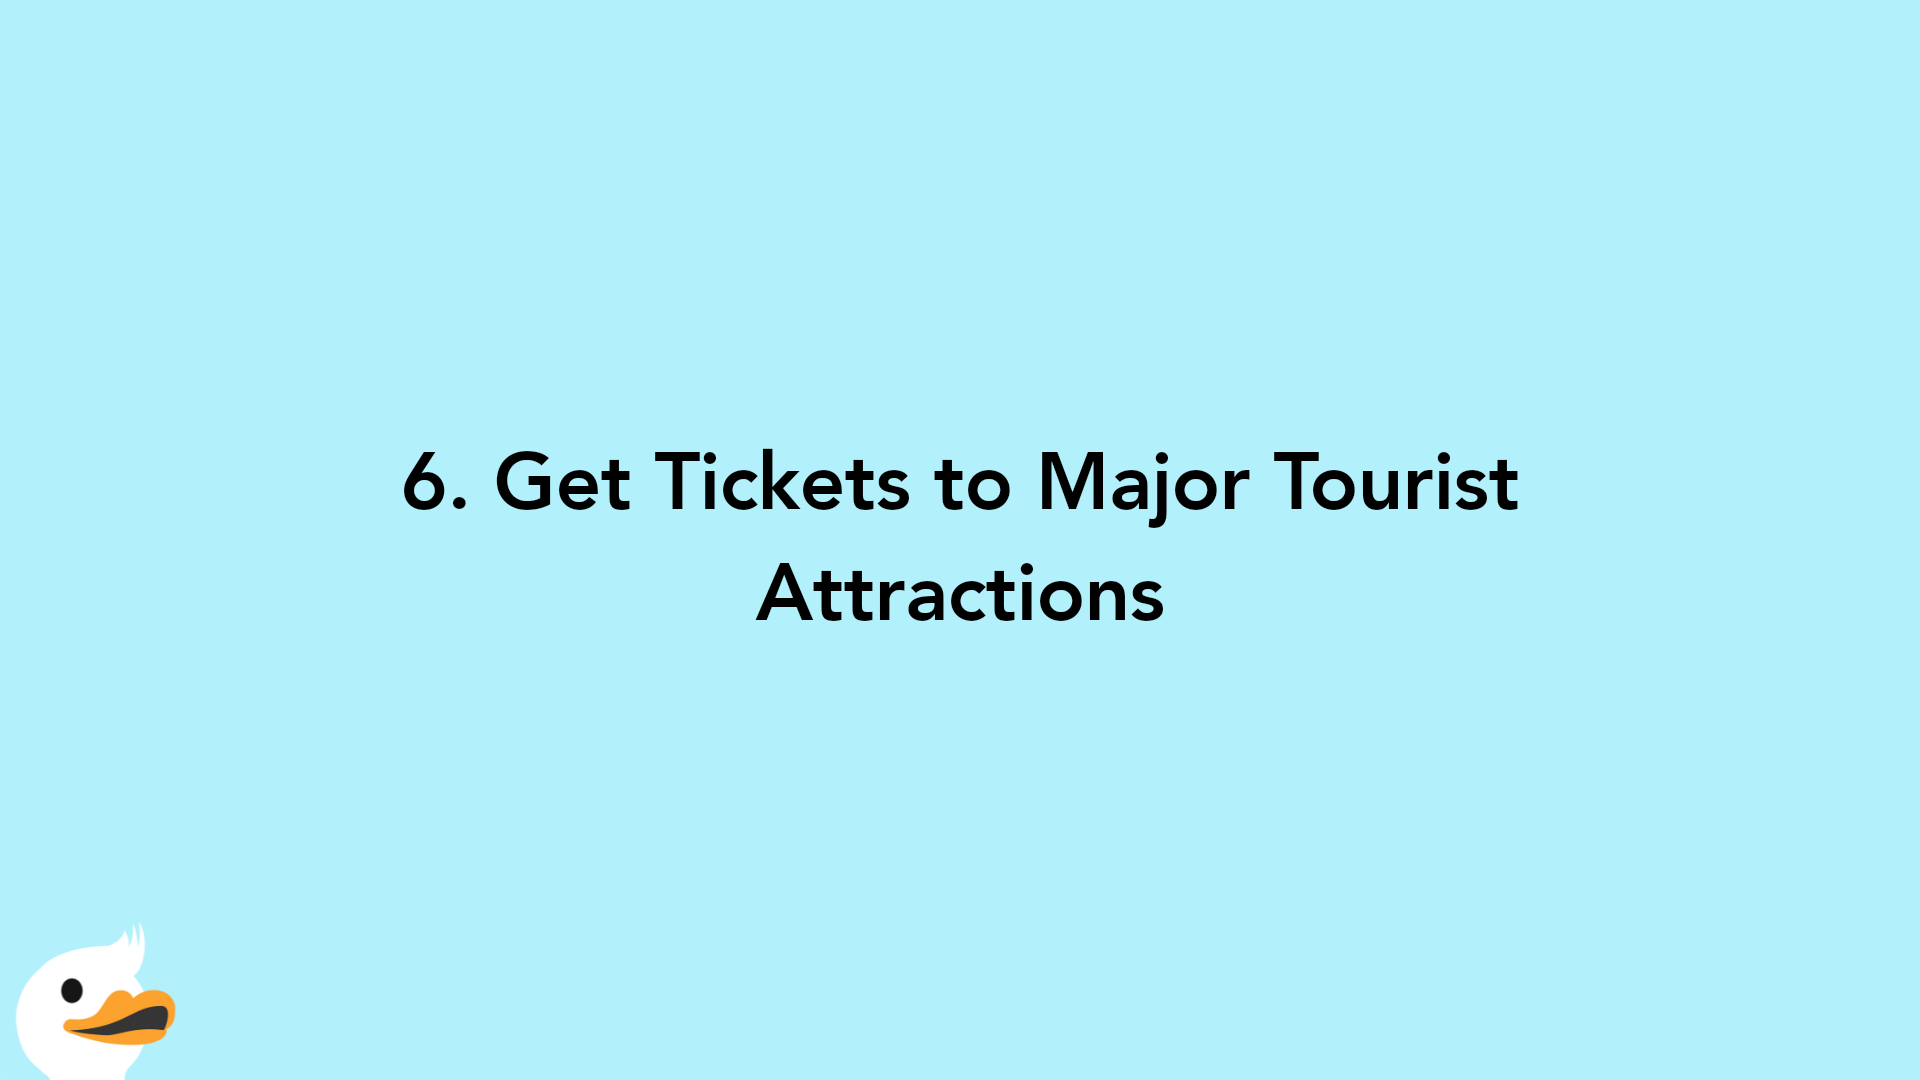 6. Get Tickets to Major Tourist Attractions